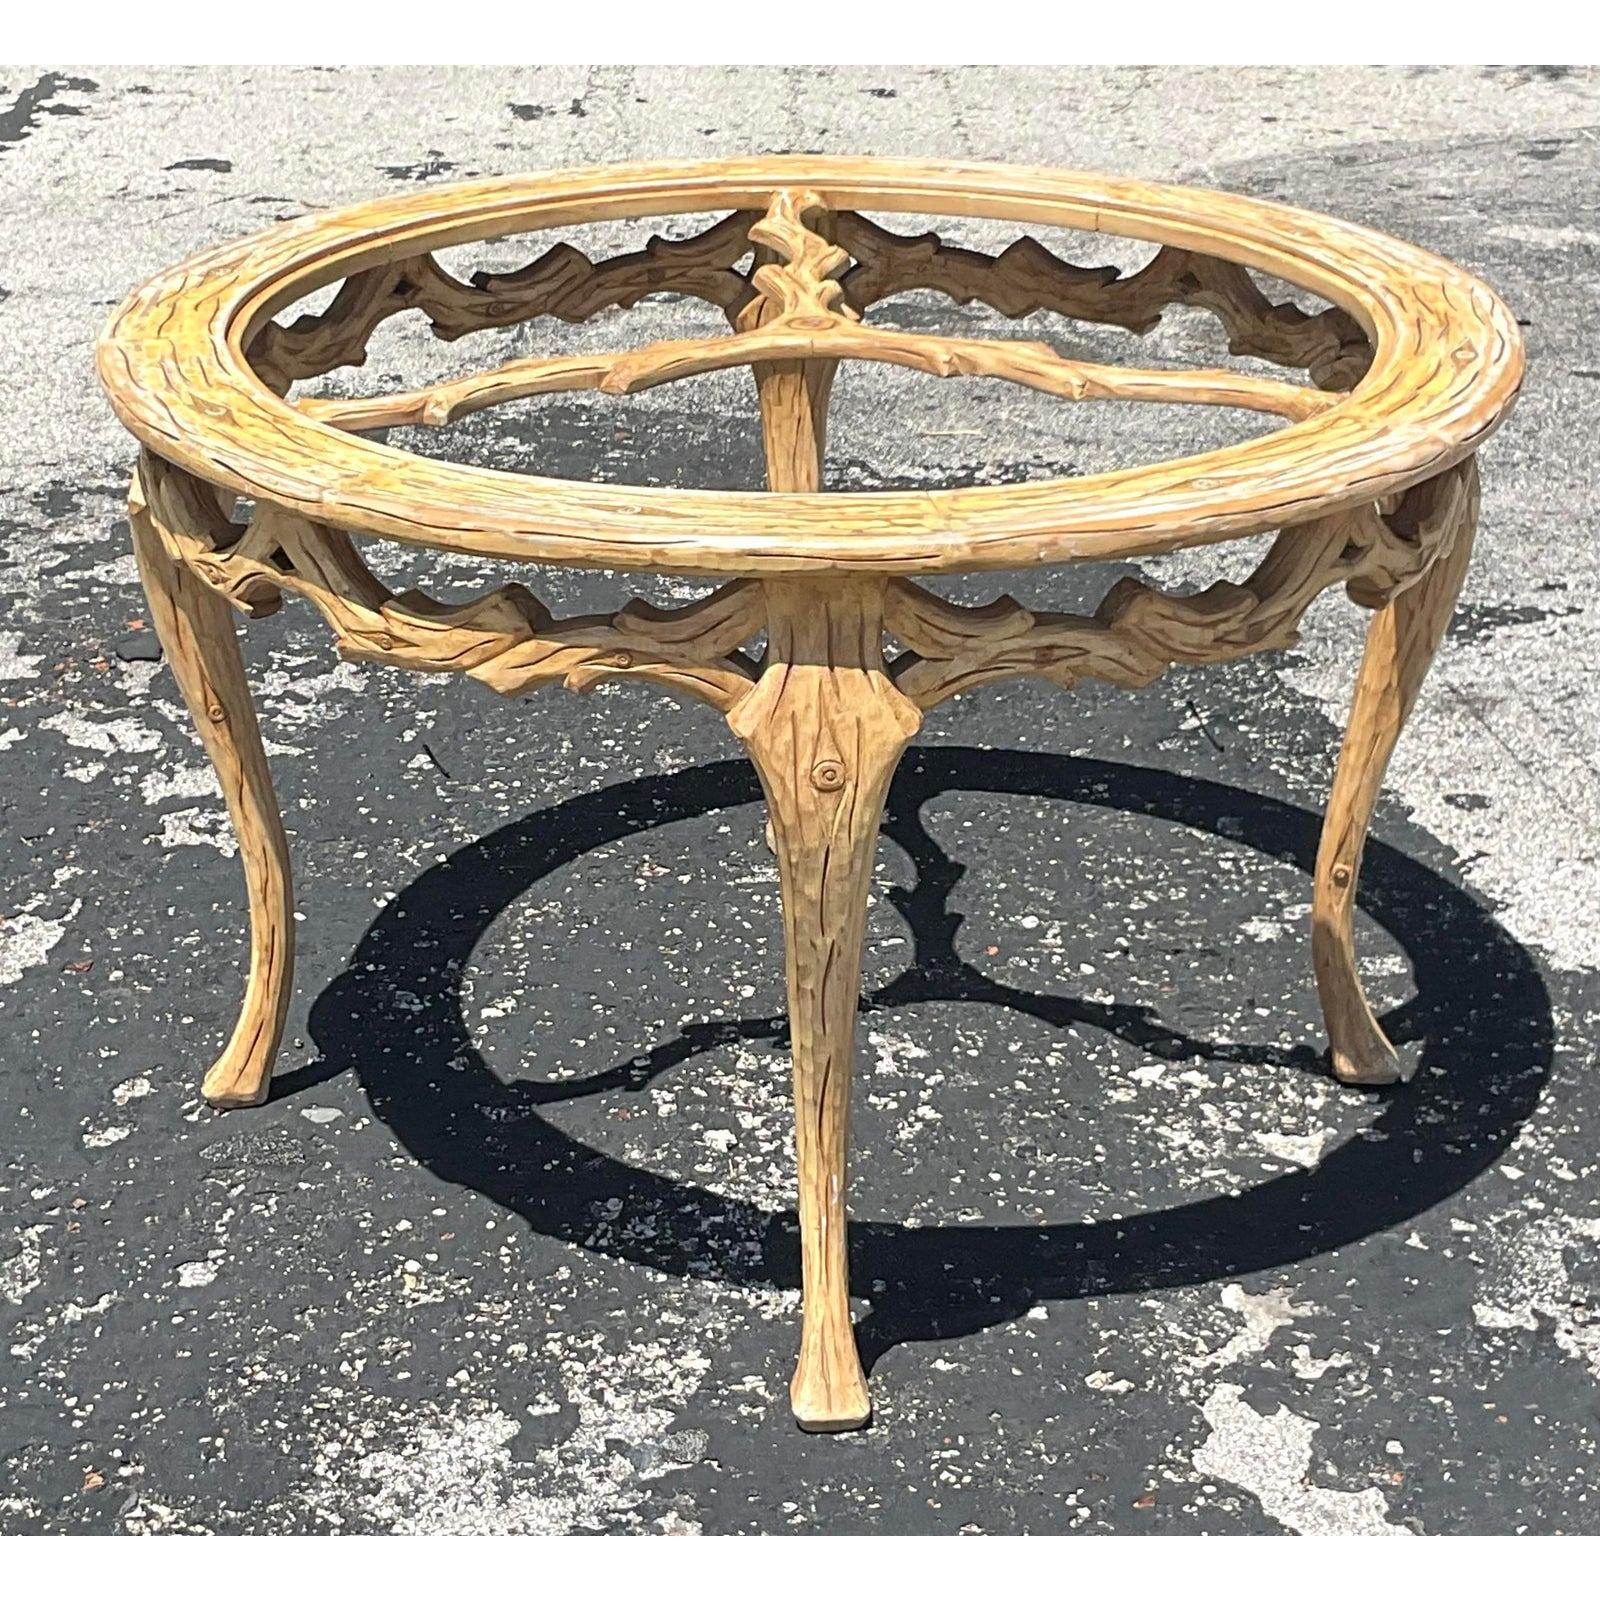 North American Mid 20th Century Vintage Regency Faux Bois Dining Table For Sale